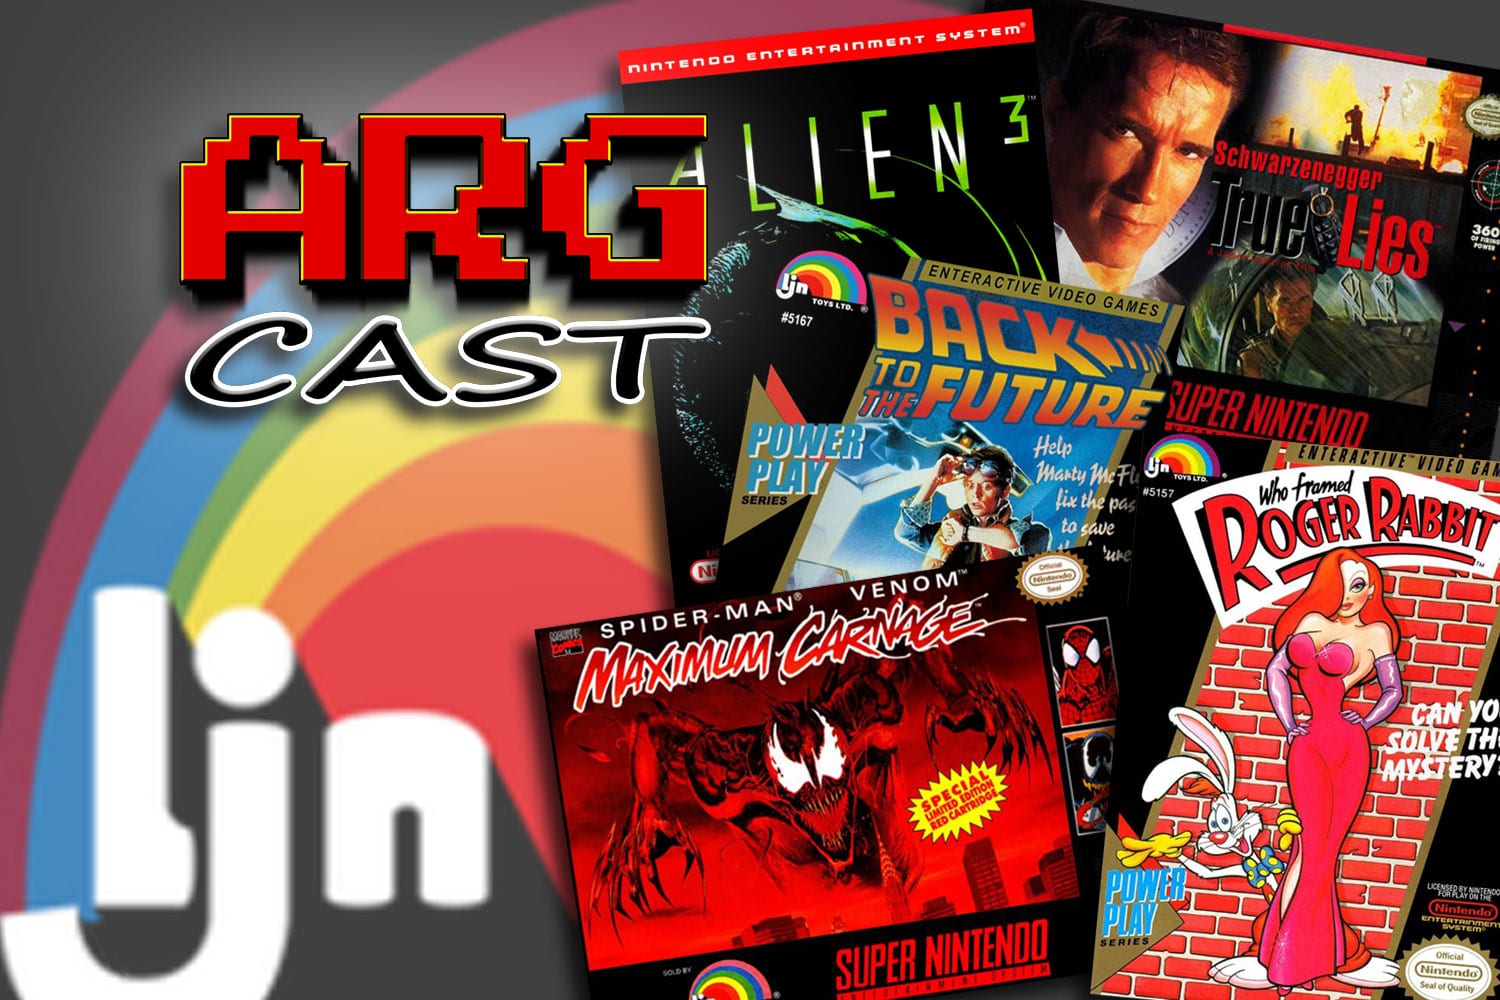 ARGcast #144: The History of Video Game Publisher LJN